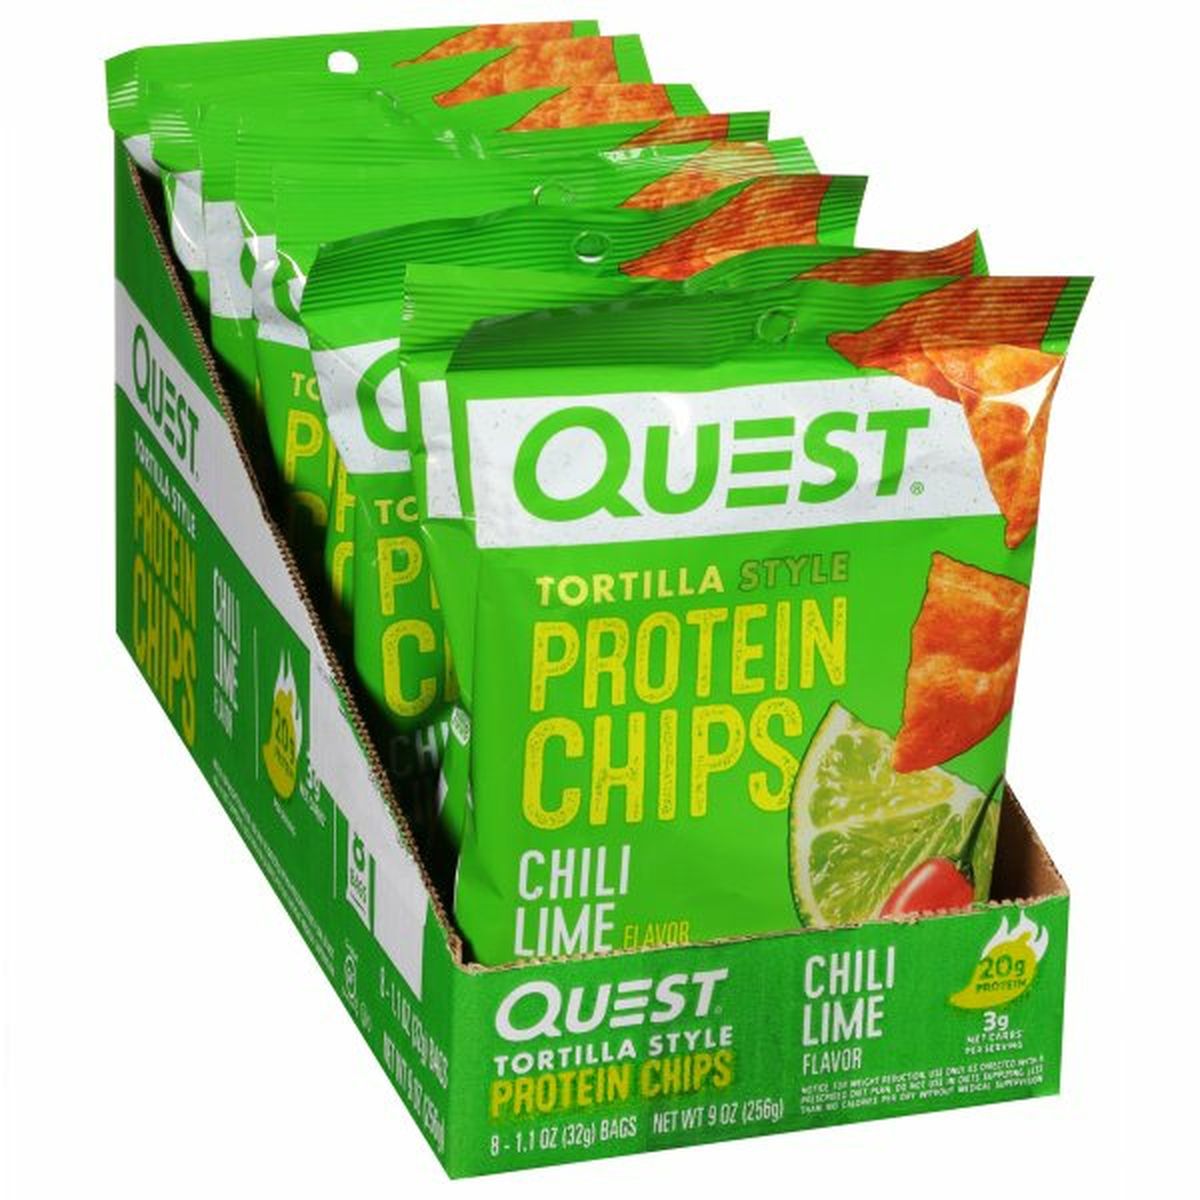 Calories in Quest Protein Chips, Chili Lime Flavor, Tortilla Style